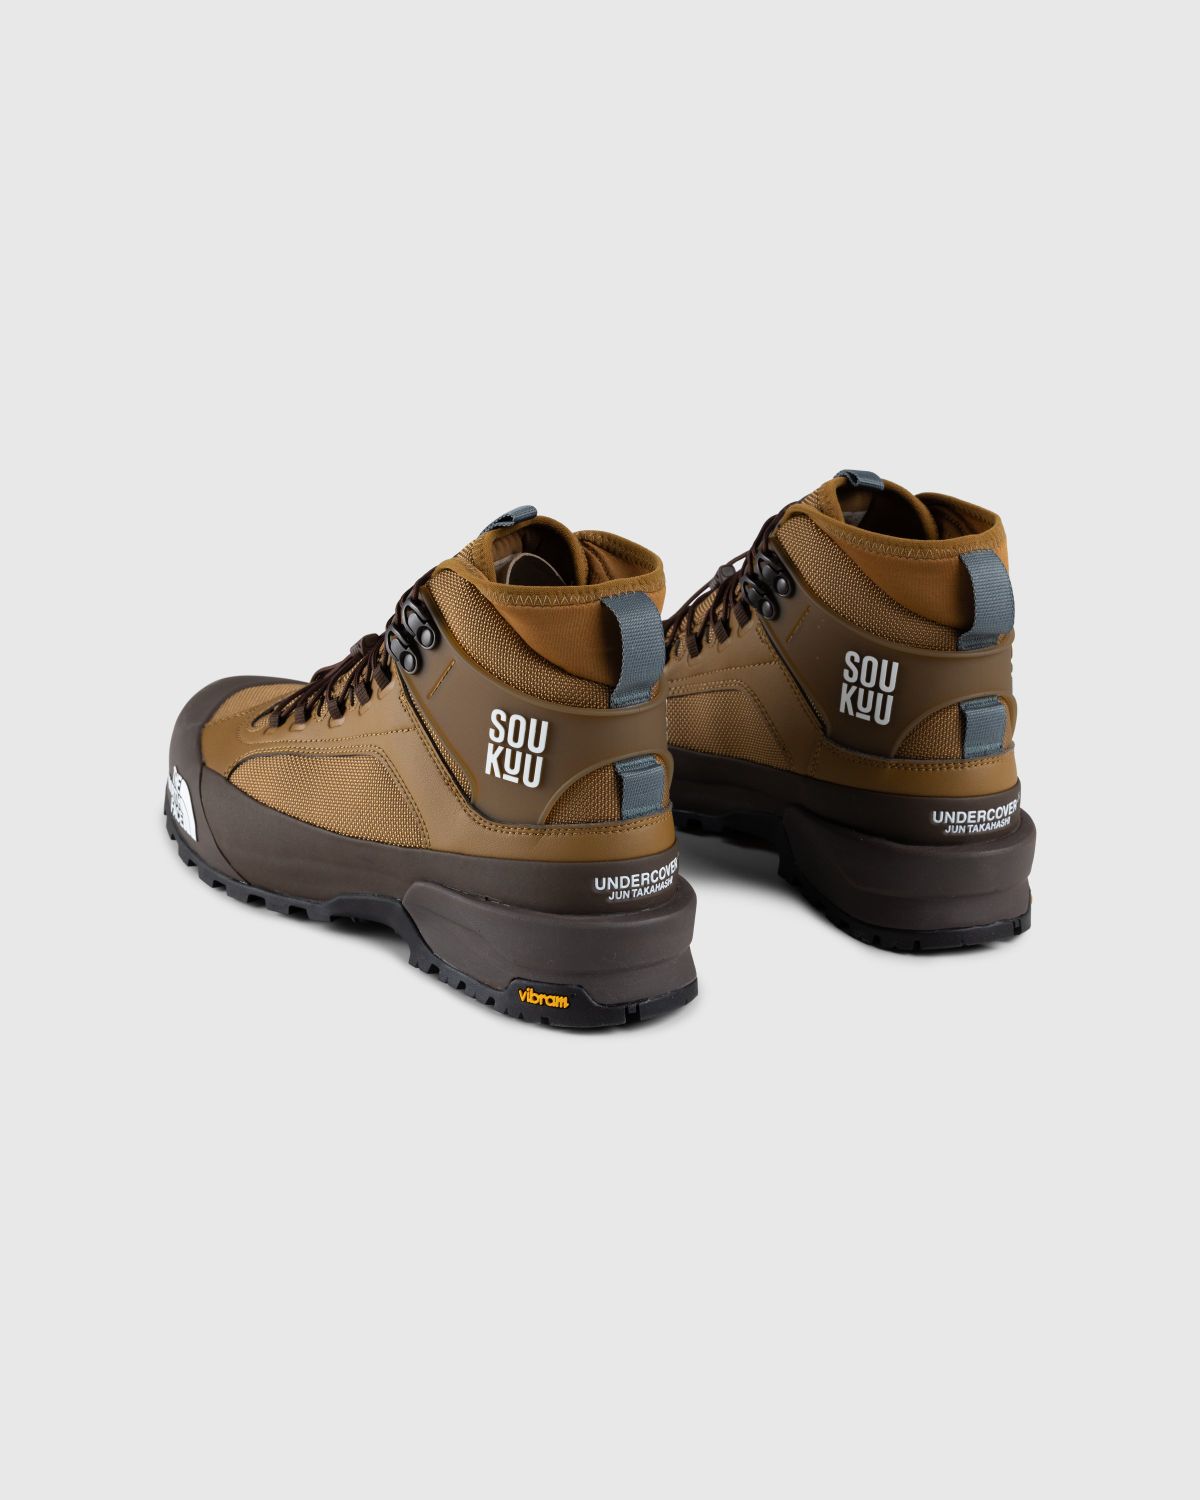 The North Face x UNDERCOVER – Soukuu Trail RAT Bronze Brown 